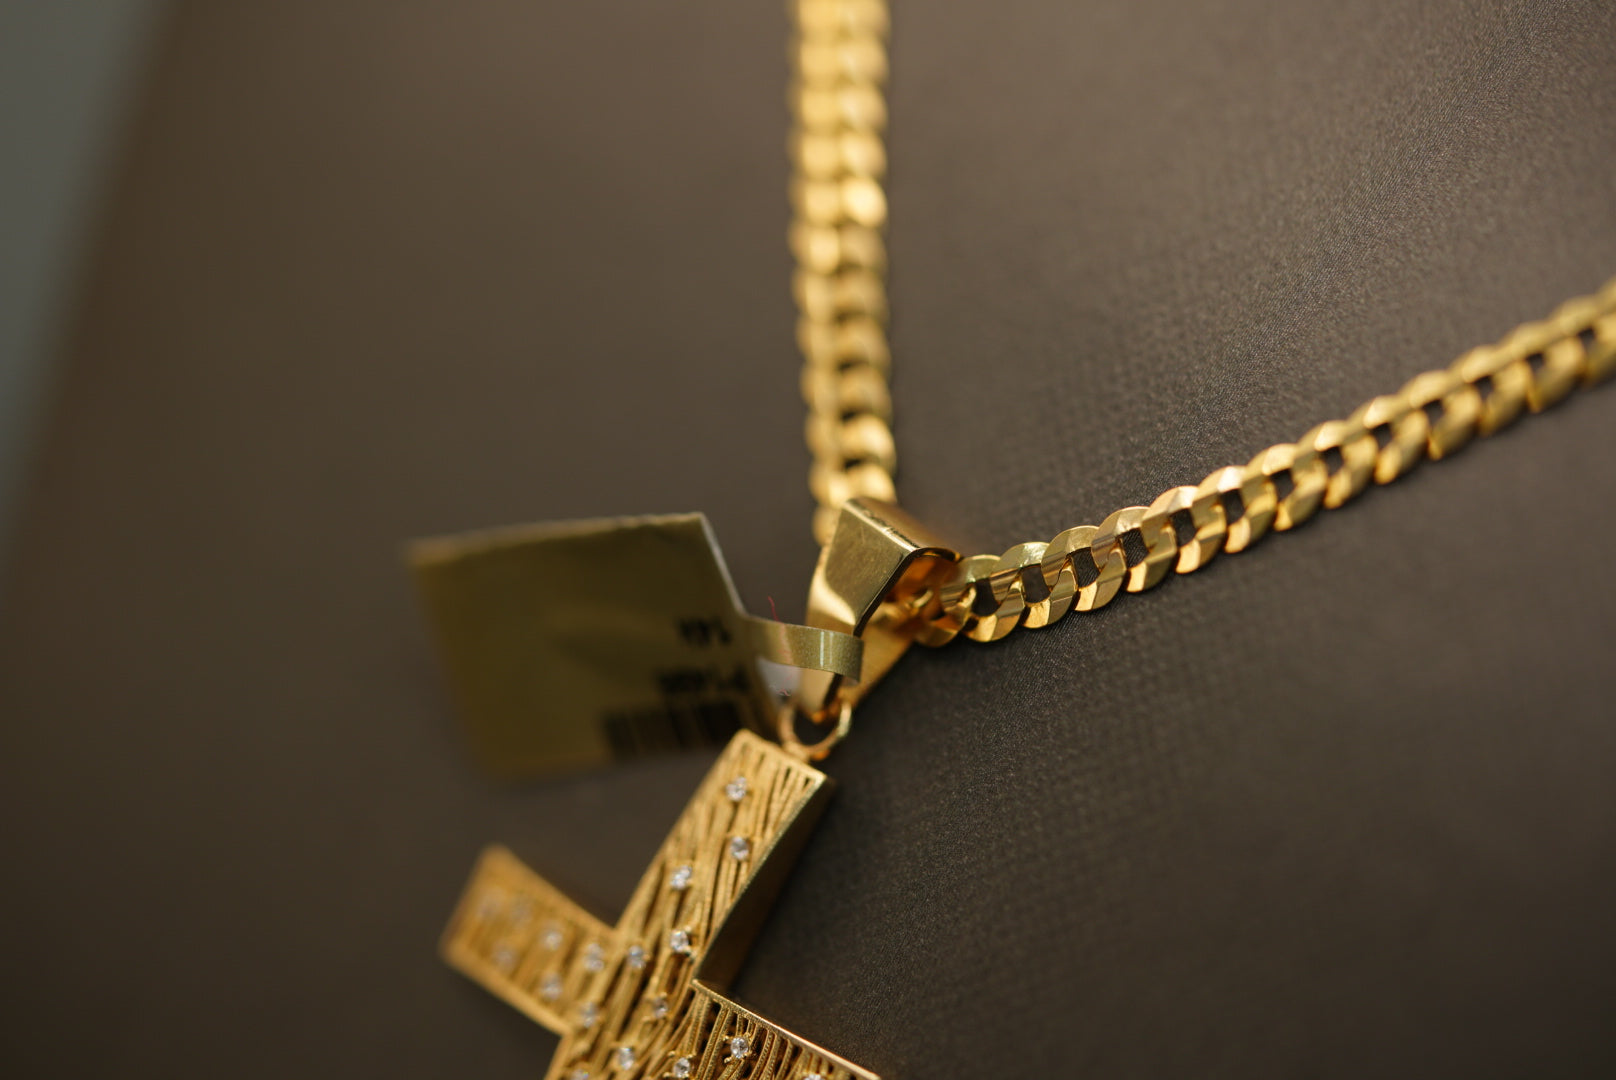 14k Cross with Stone and Design Pendant